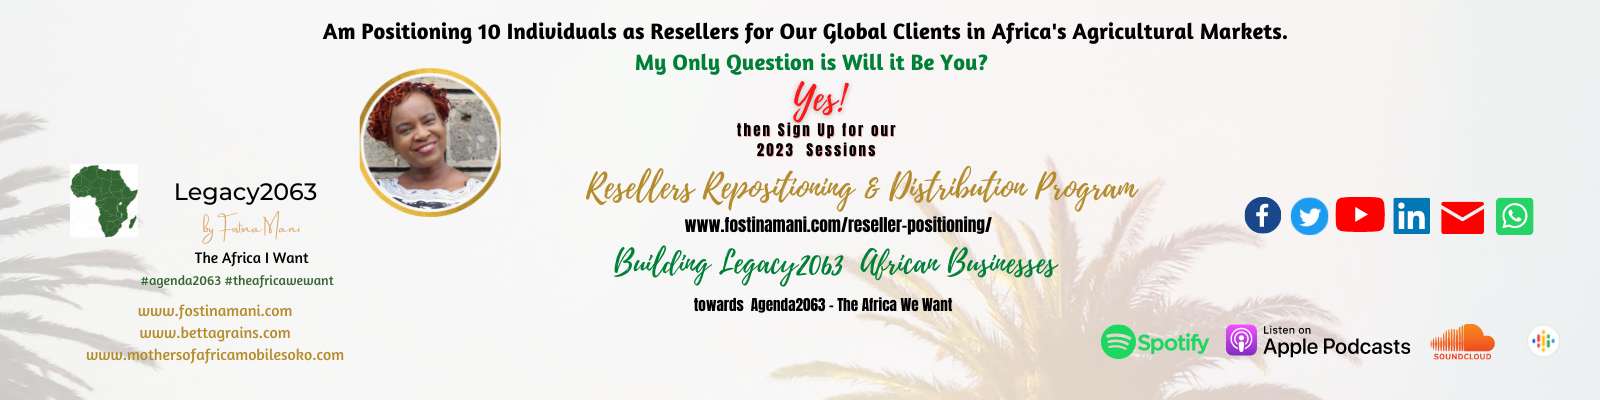 Repositioning Resellers Program 2023 1600by400pix